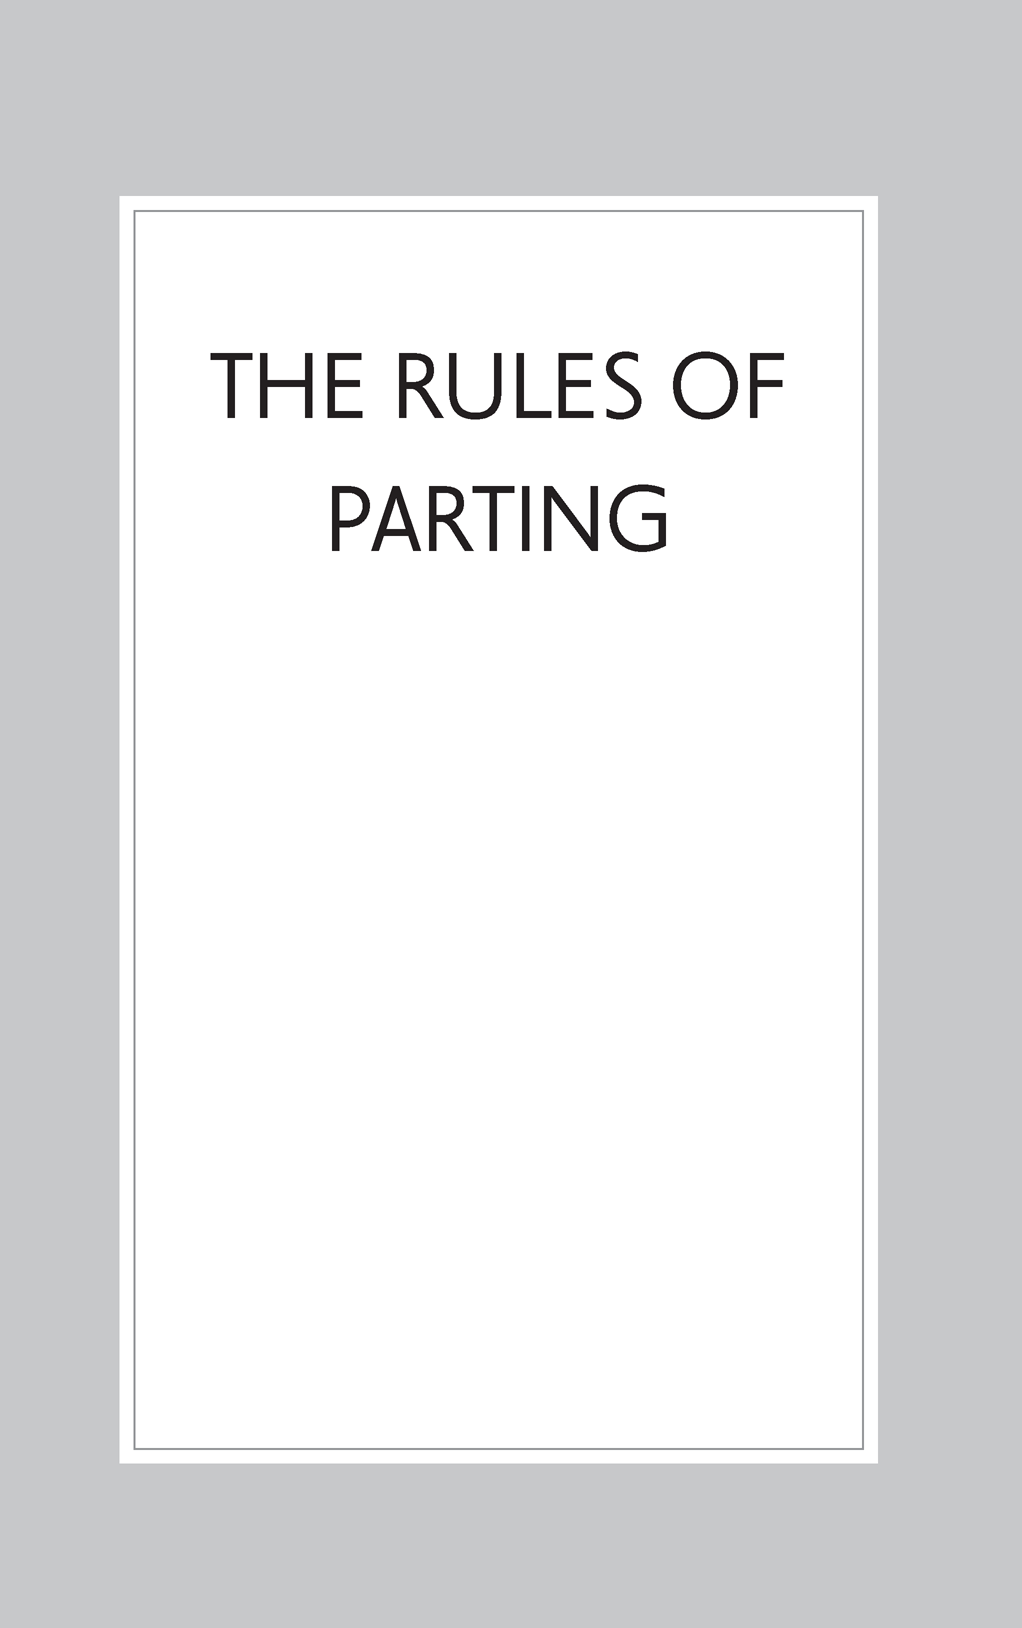 The Rules of Parting